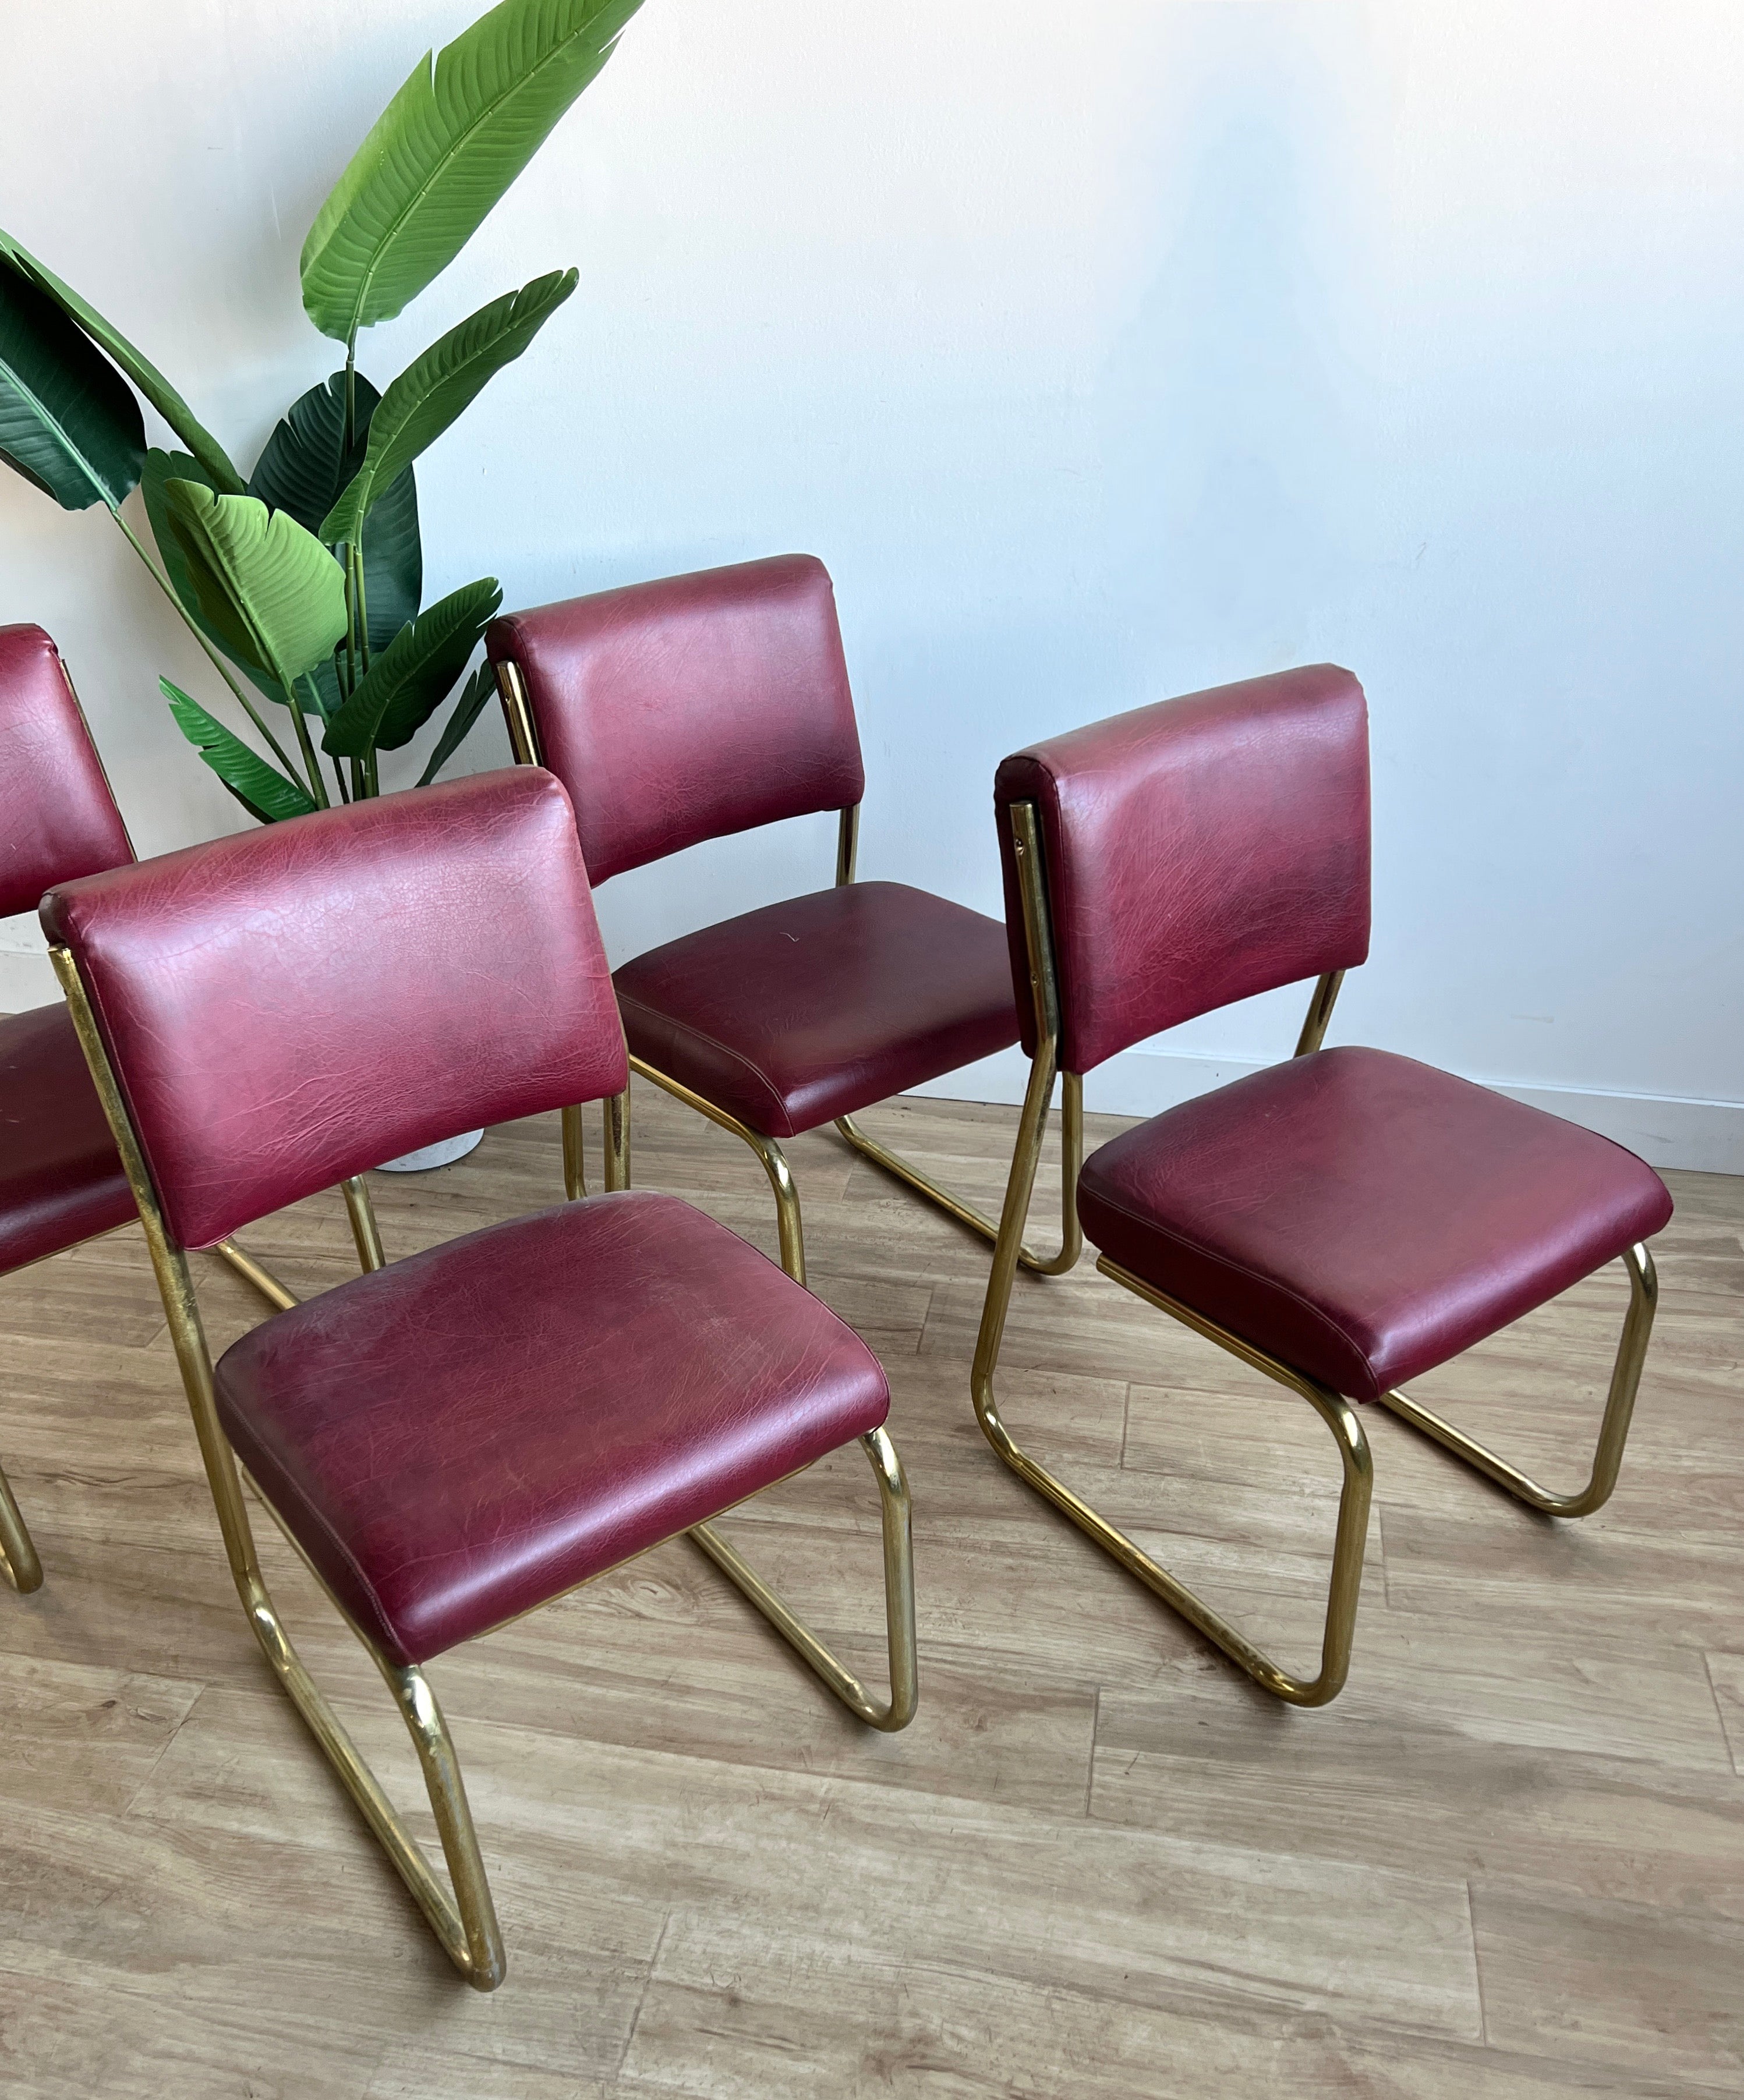 Set of Four Vintage Brass Dining Chairs in Your Fabric